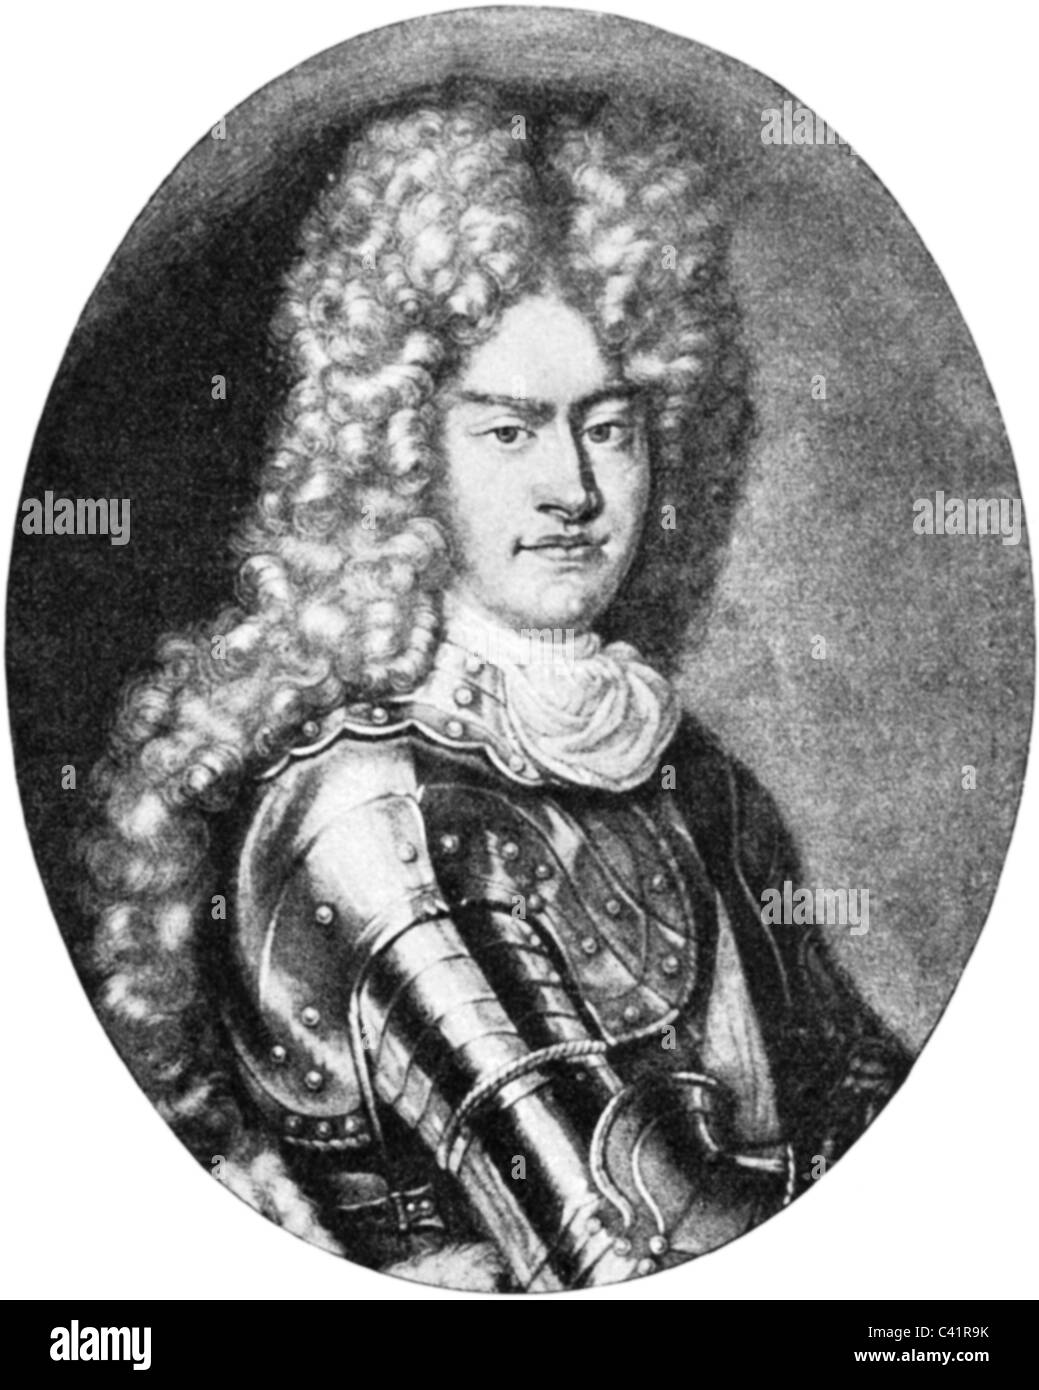 Frederick Augustus I 'the Strong', 12.5.1670 - 1.2.1733, Elector of Saxony 27.4.1694 - 1.2.1733 and King of Poland 15.9.1697 - 1.2.1733, portrait, copper engraving by Schenck, circa 1700, , Artist's Copyright has not to be cleared Stock Photo